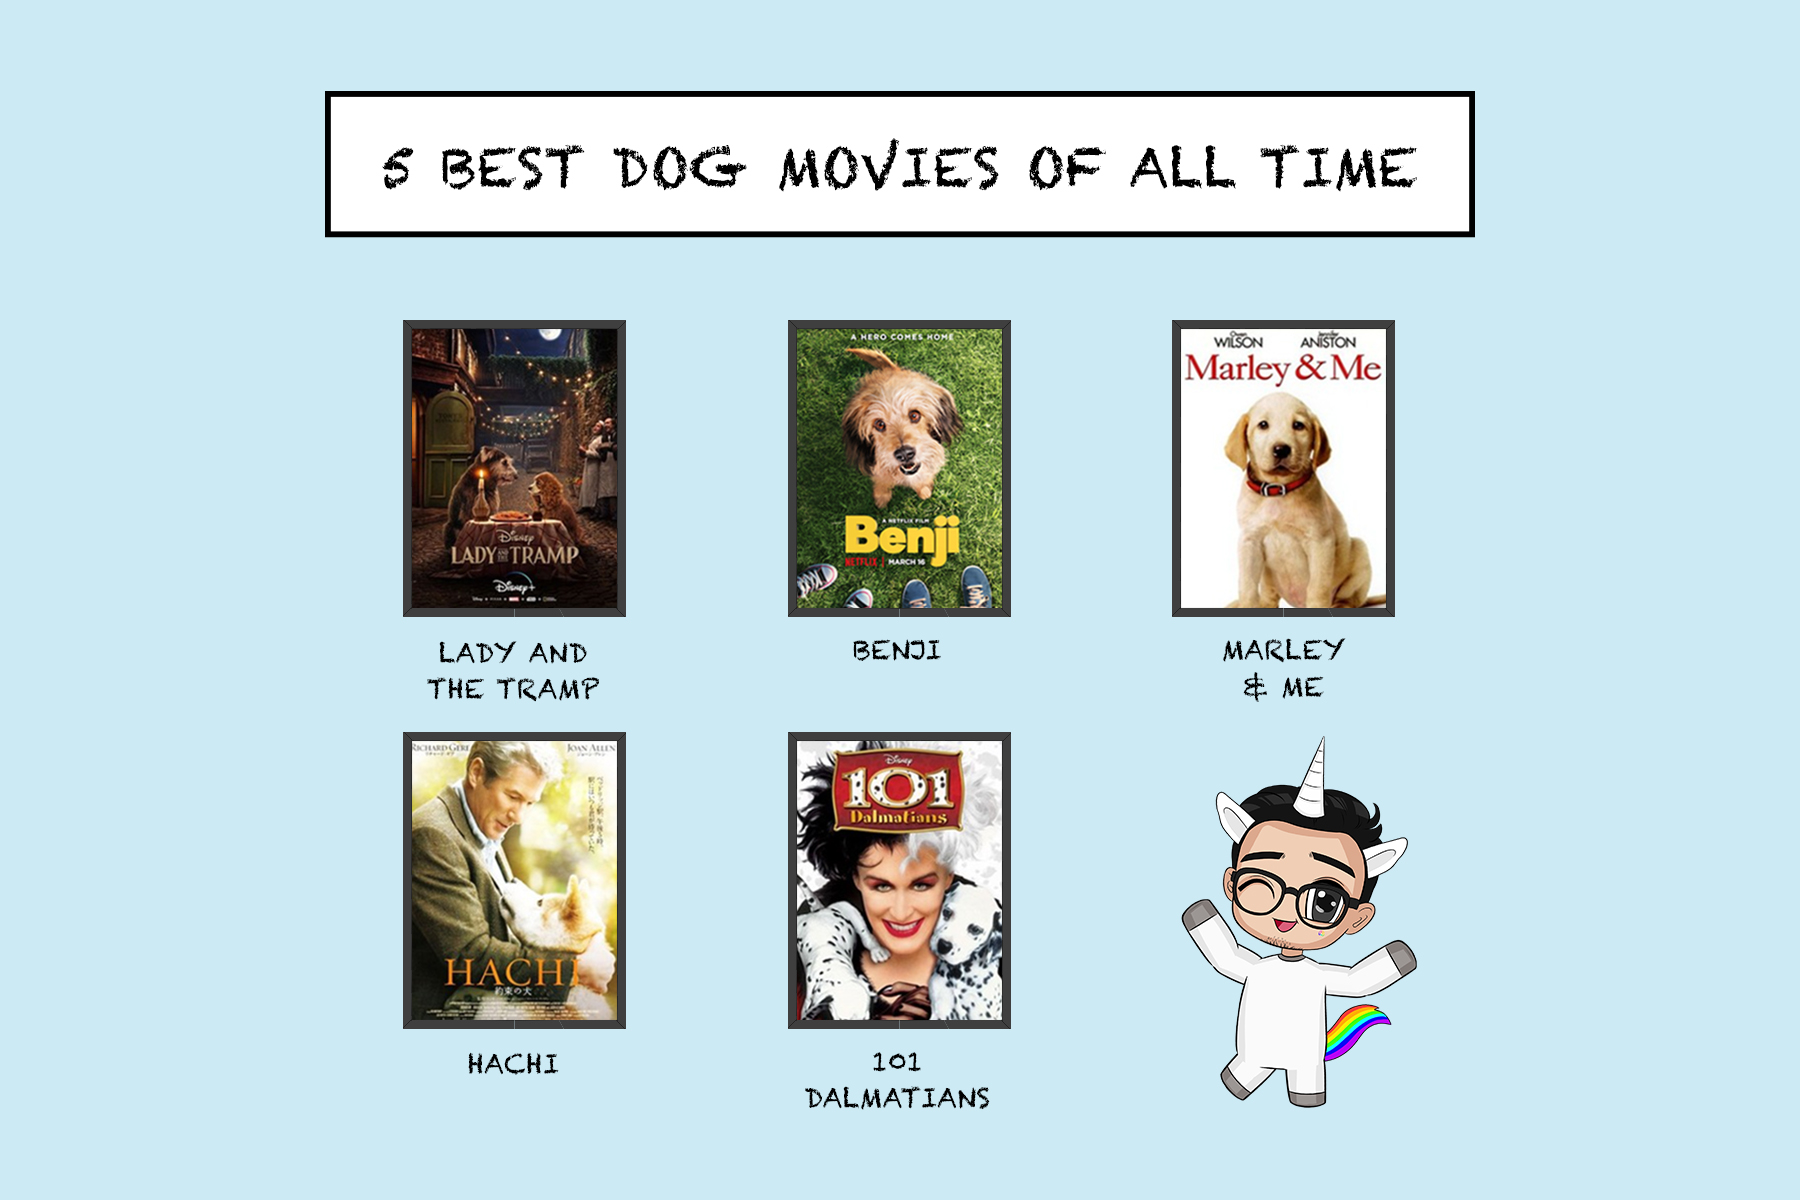 5 best dog movies of all time People's Inc.